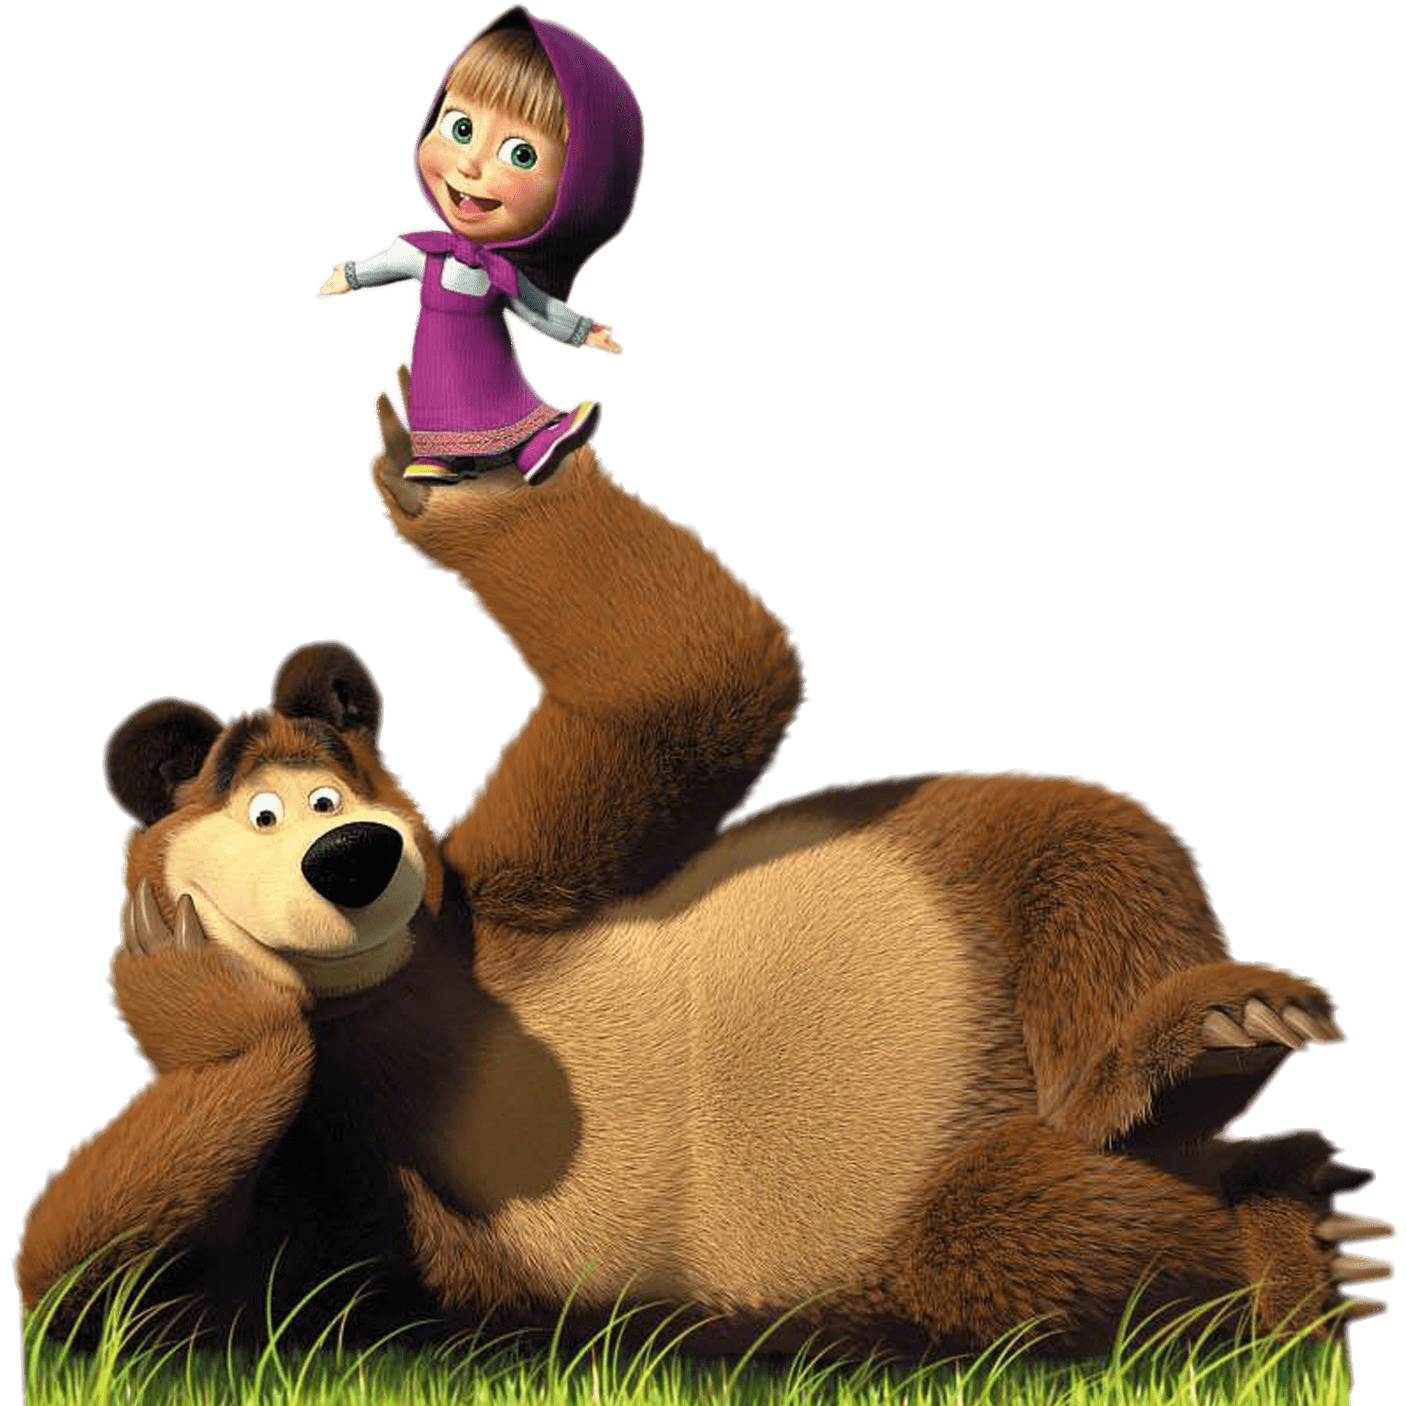 Squirrel From Masha And The Bear Transparent Image PNG